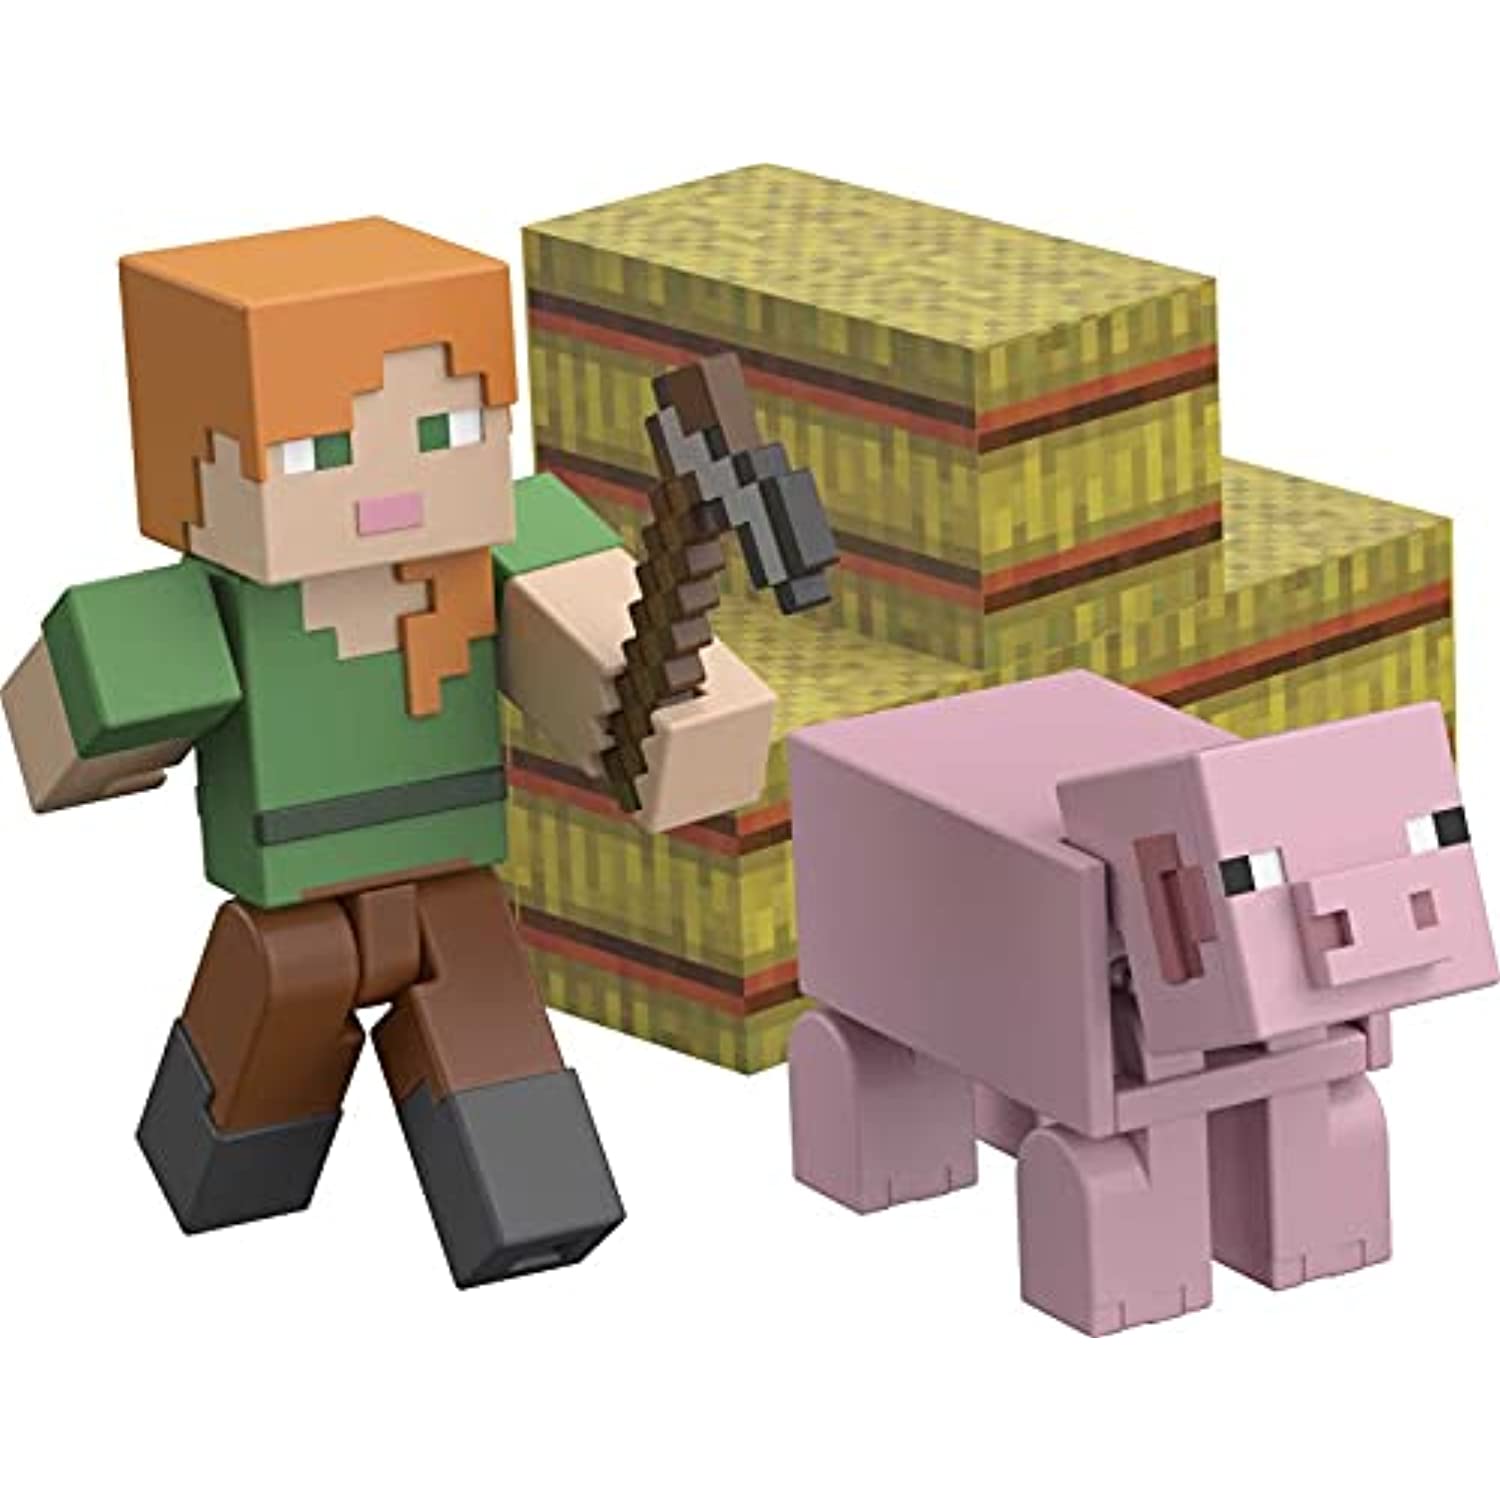 Minecraft Crimson Forest Conquest Story Pack Figures, Accessories and  Papercraft Blocks, Complete Adventure Play in a Box, Toy for Kids Ages 6  Years and Older : Buy Online at Best Price in